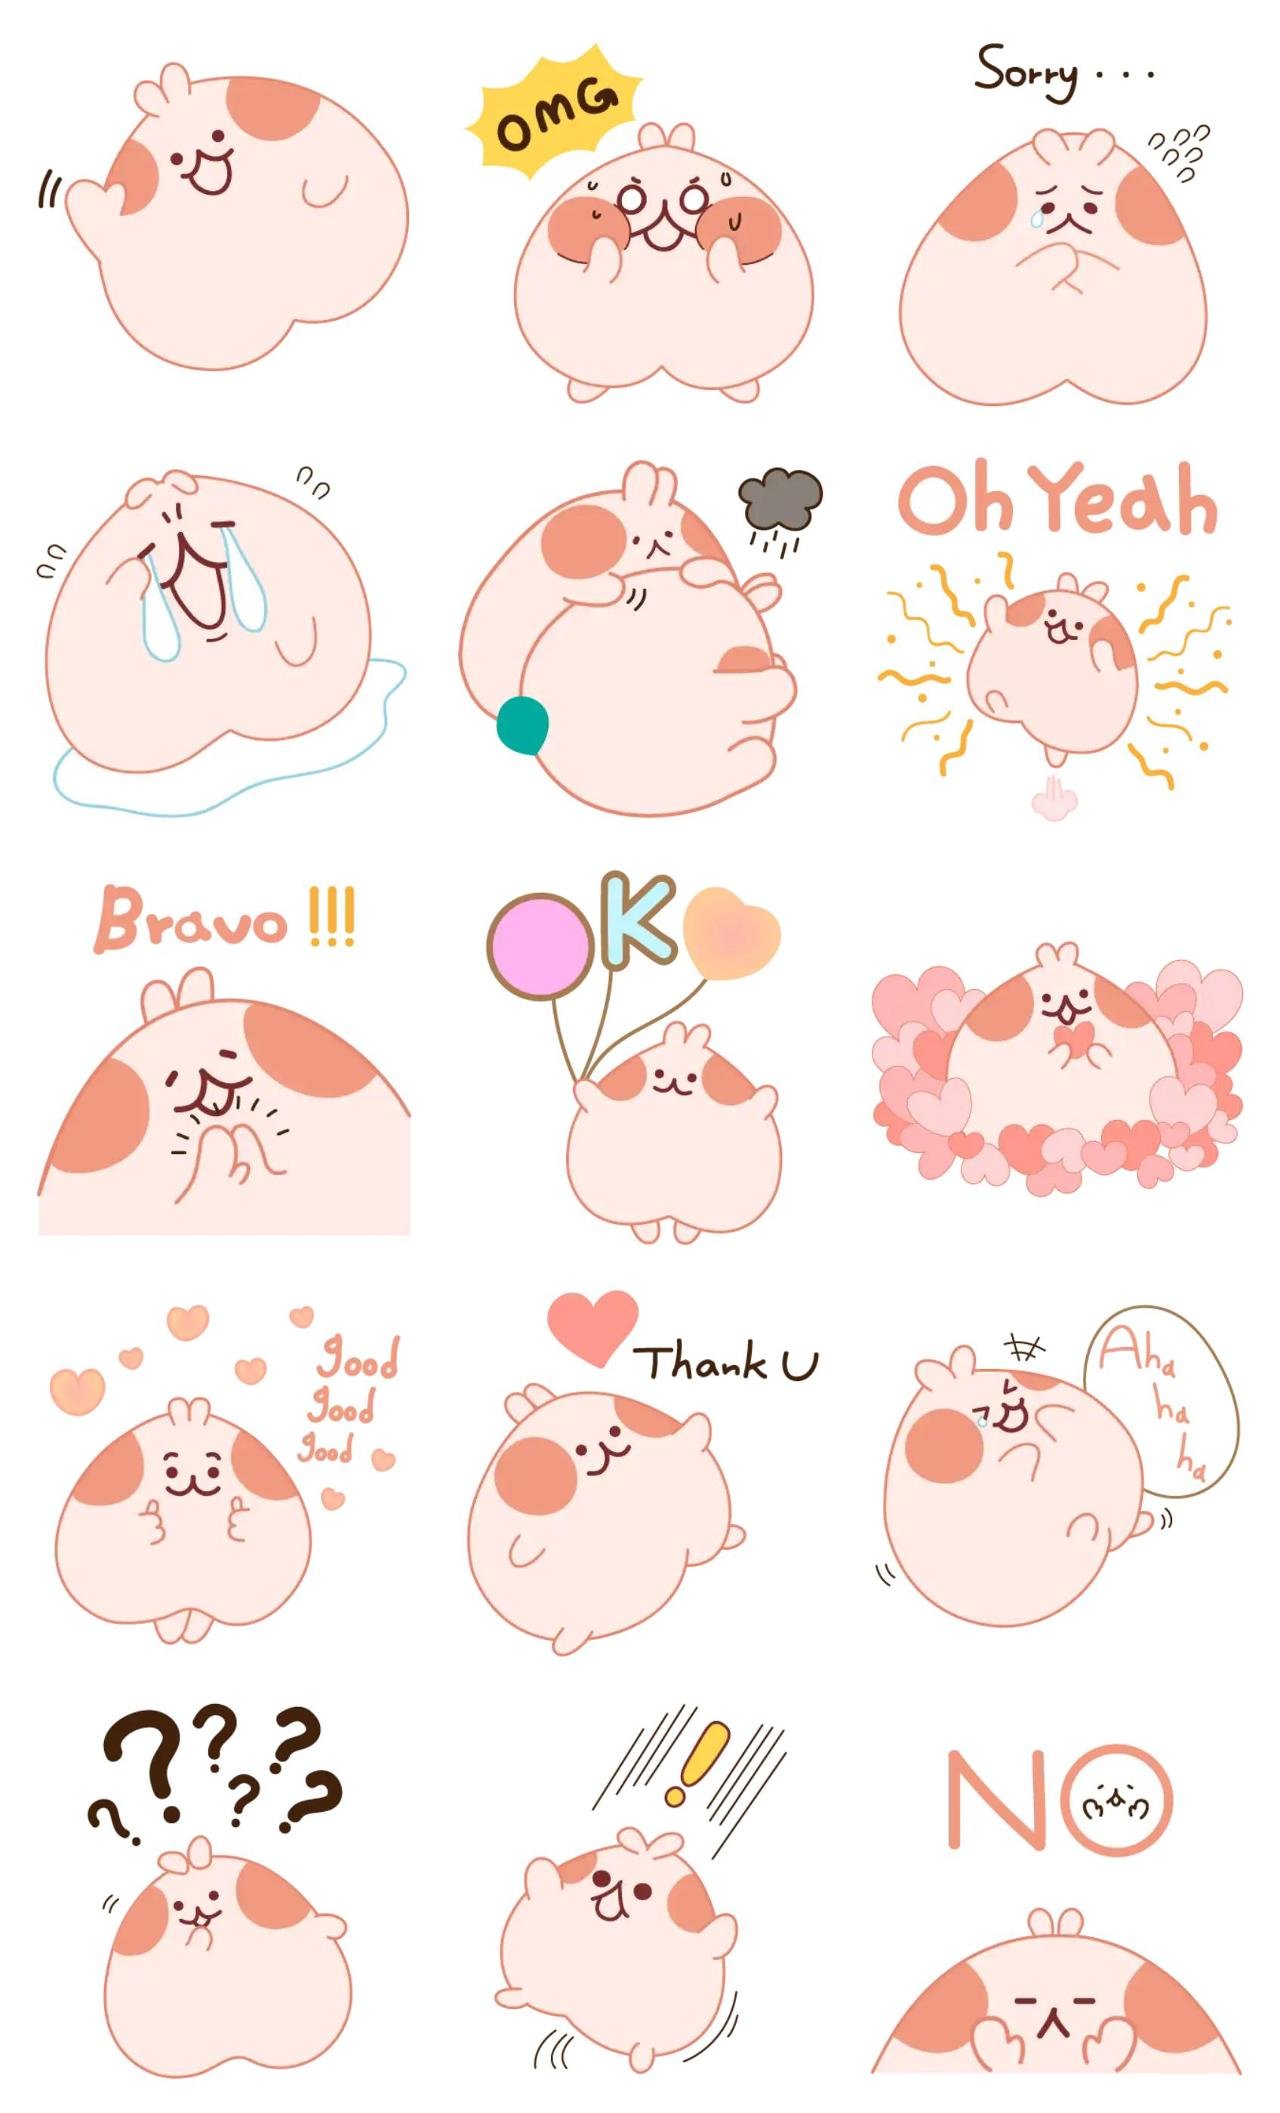 Peach Bunny MOMOZ Animation/Cartoon,Animals sticker pack for Whatsapp, Telegram, Signal, and others chatting and message apps